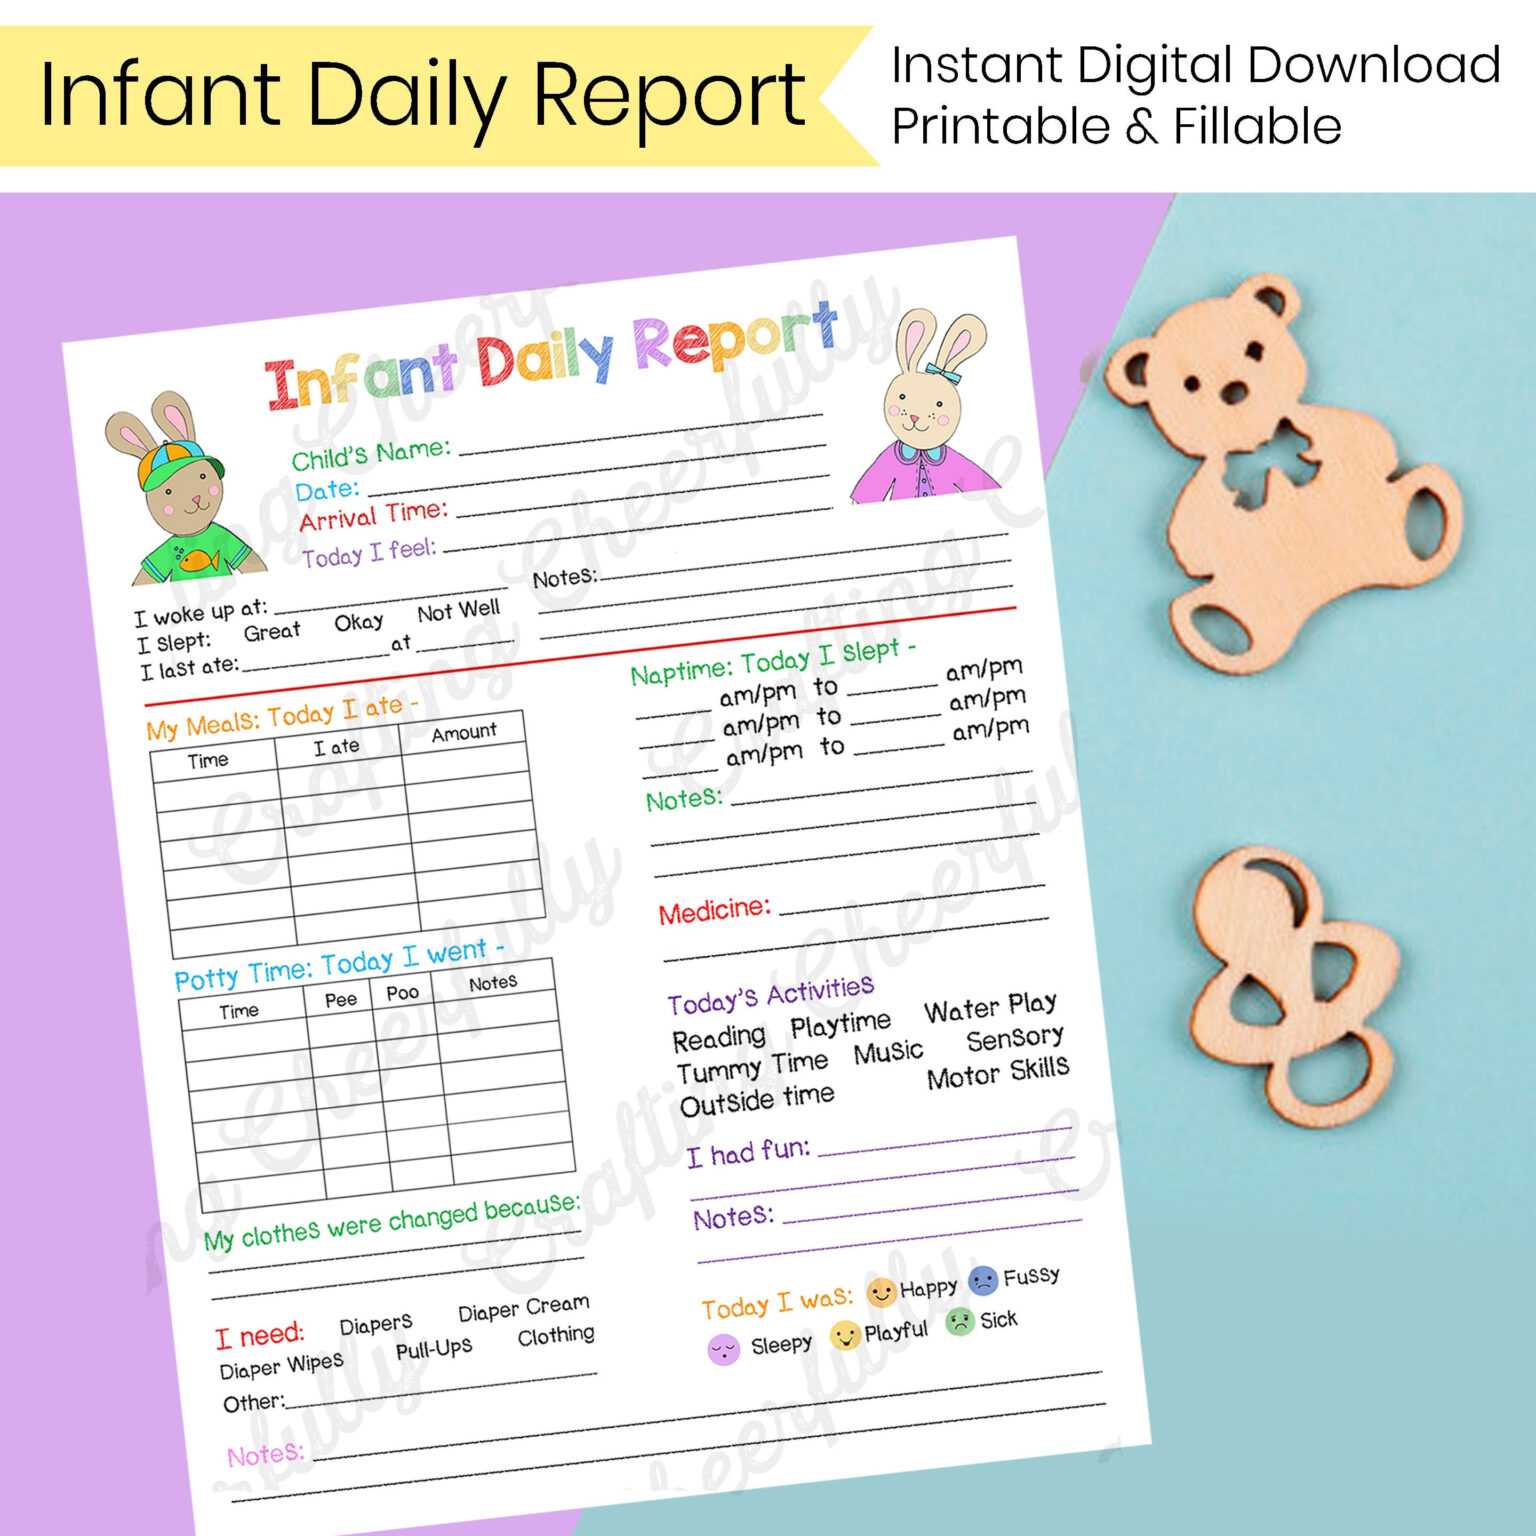 daily infant schedule